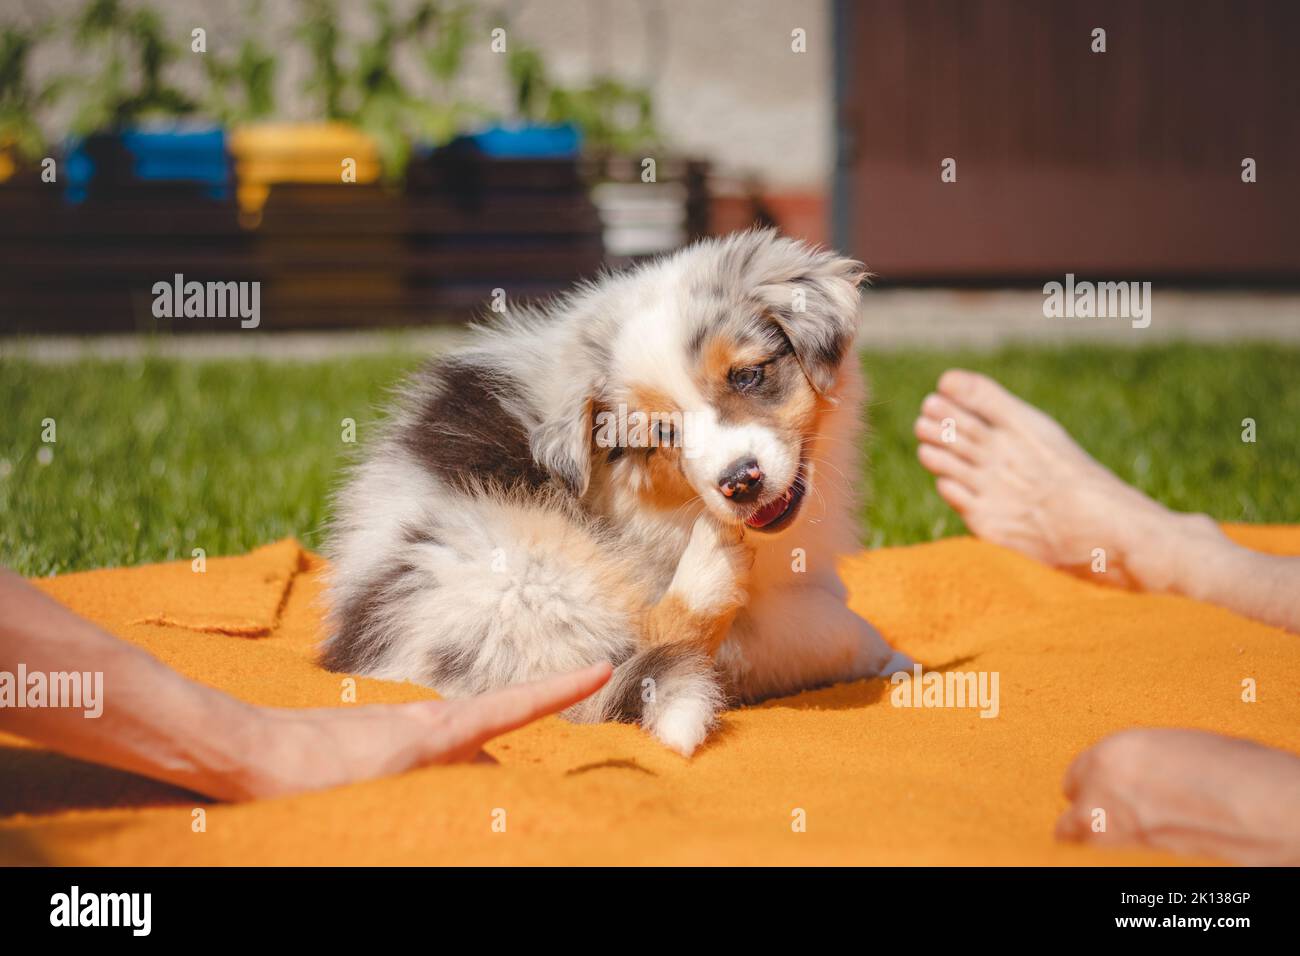 Australian Shepherd puppy lies down in an orange blanket and teases his owner. Playing with human's fingers. Playing with a small blue merle dog. Stock Photo